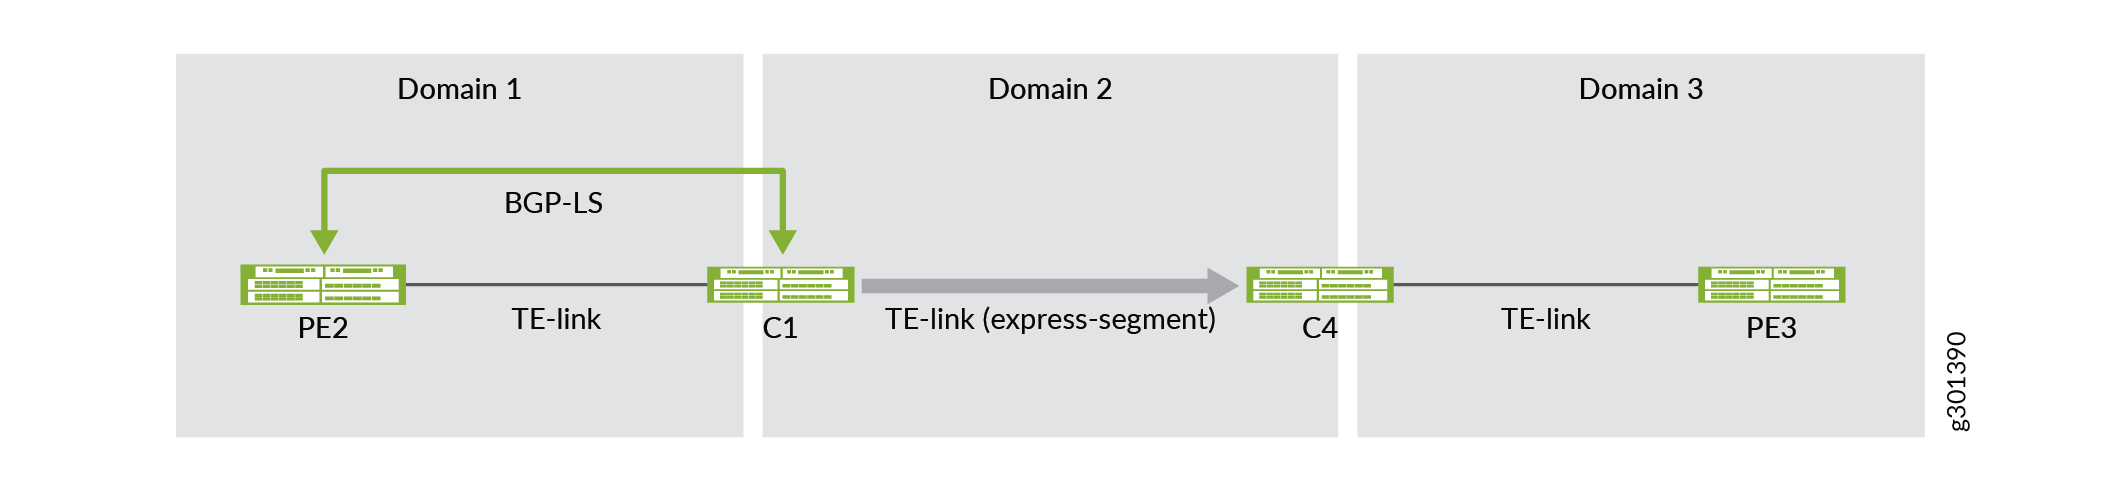 Abstracting Traffic Engineered Domain 2 with Express Segment